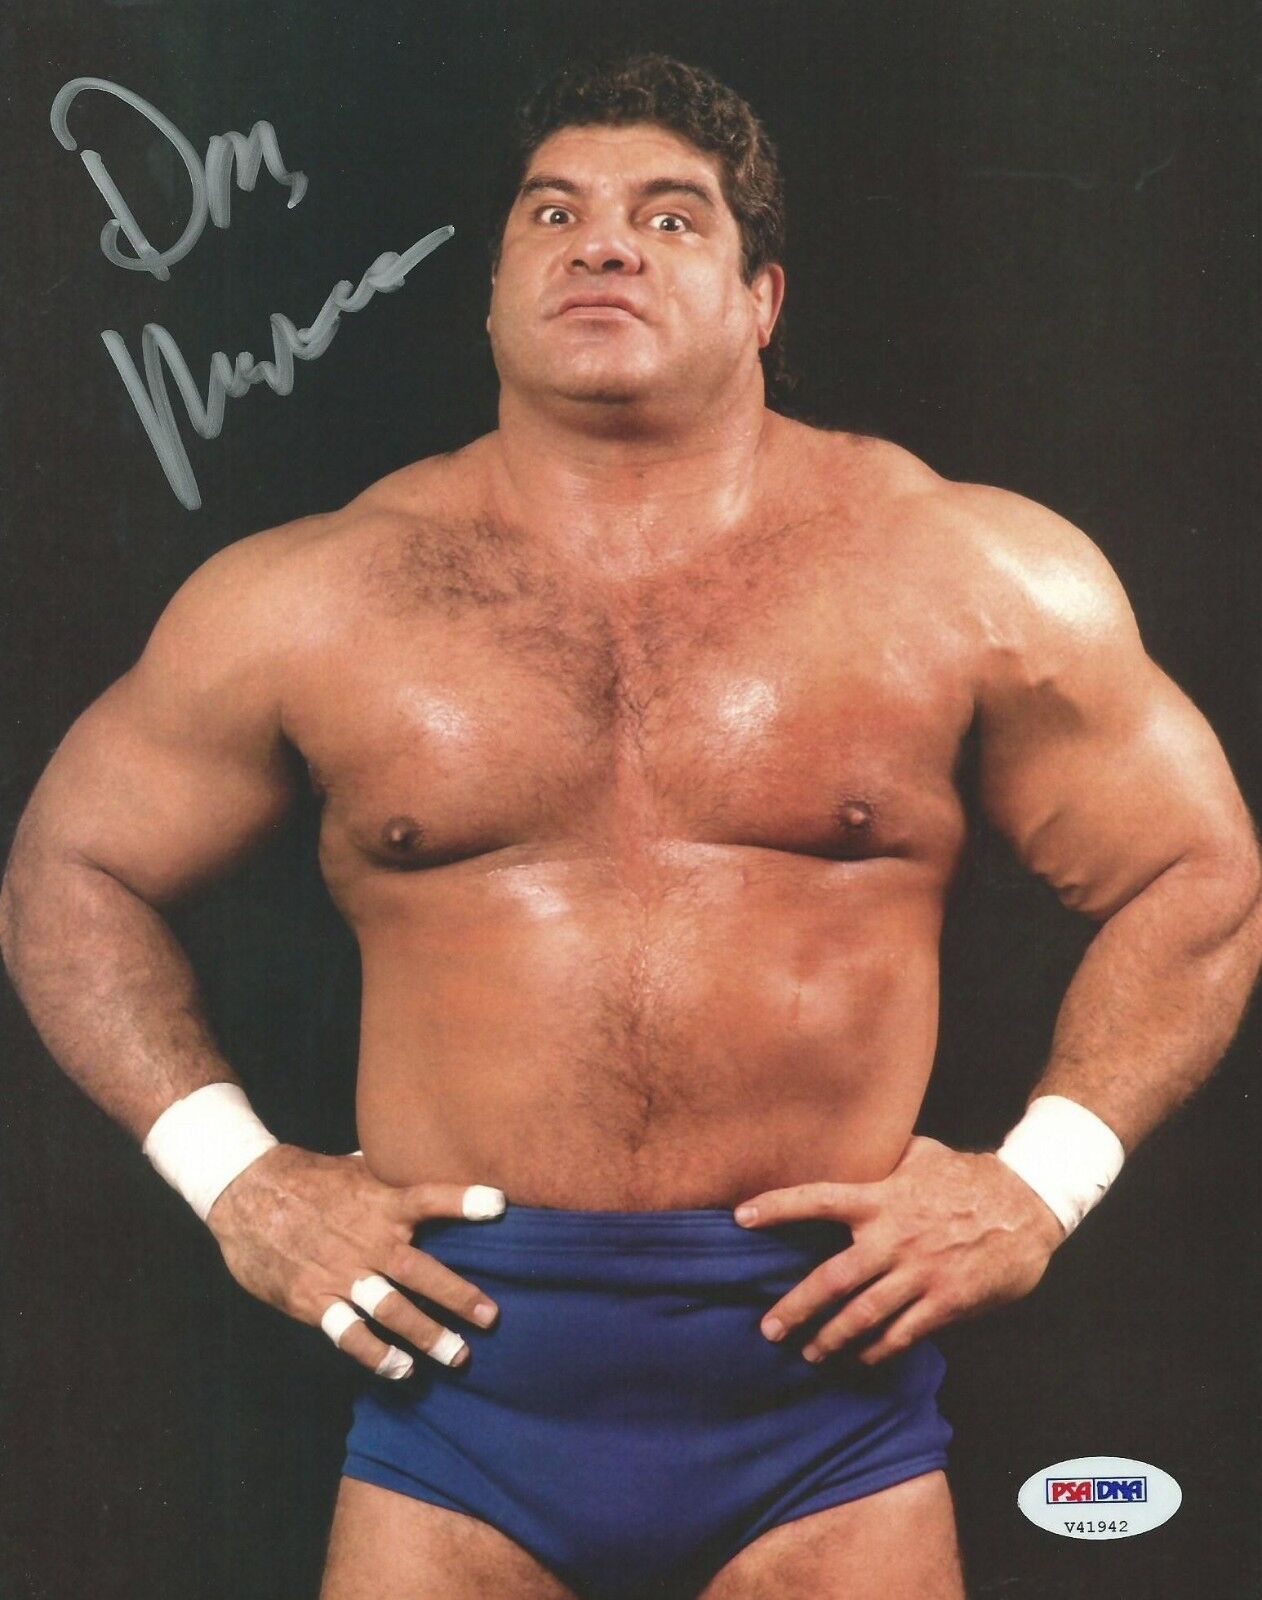 Don Muraco Signed WWE 8x10 Photo Poster painting PSA/DNA COA Picture Auto'd Magnificent The Rock